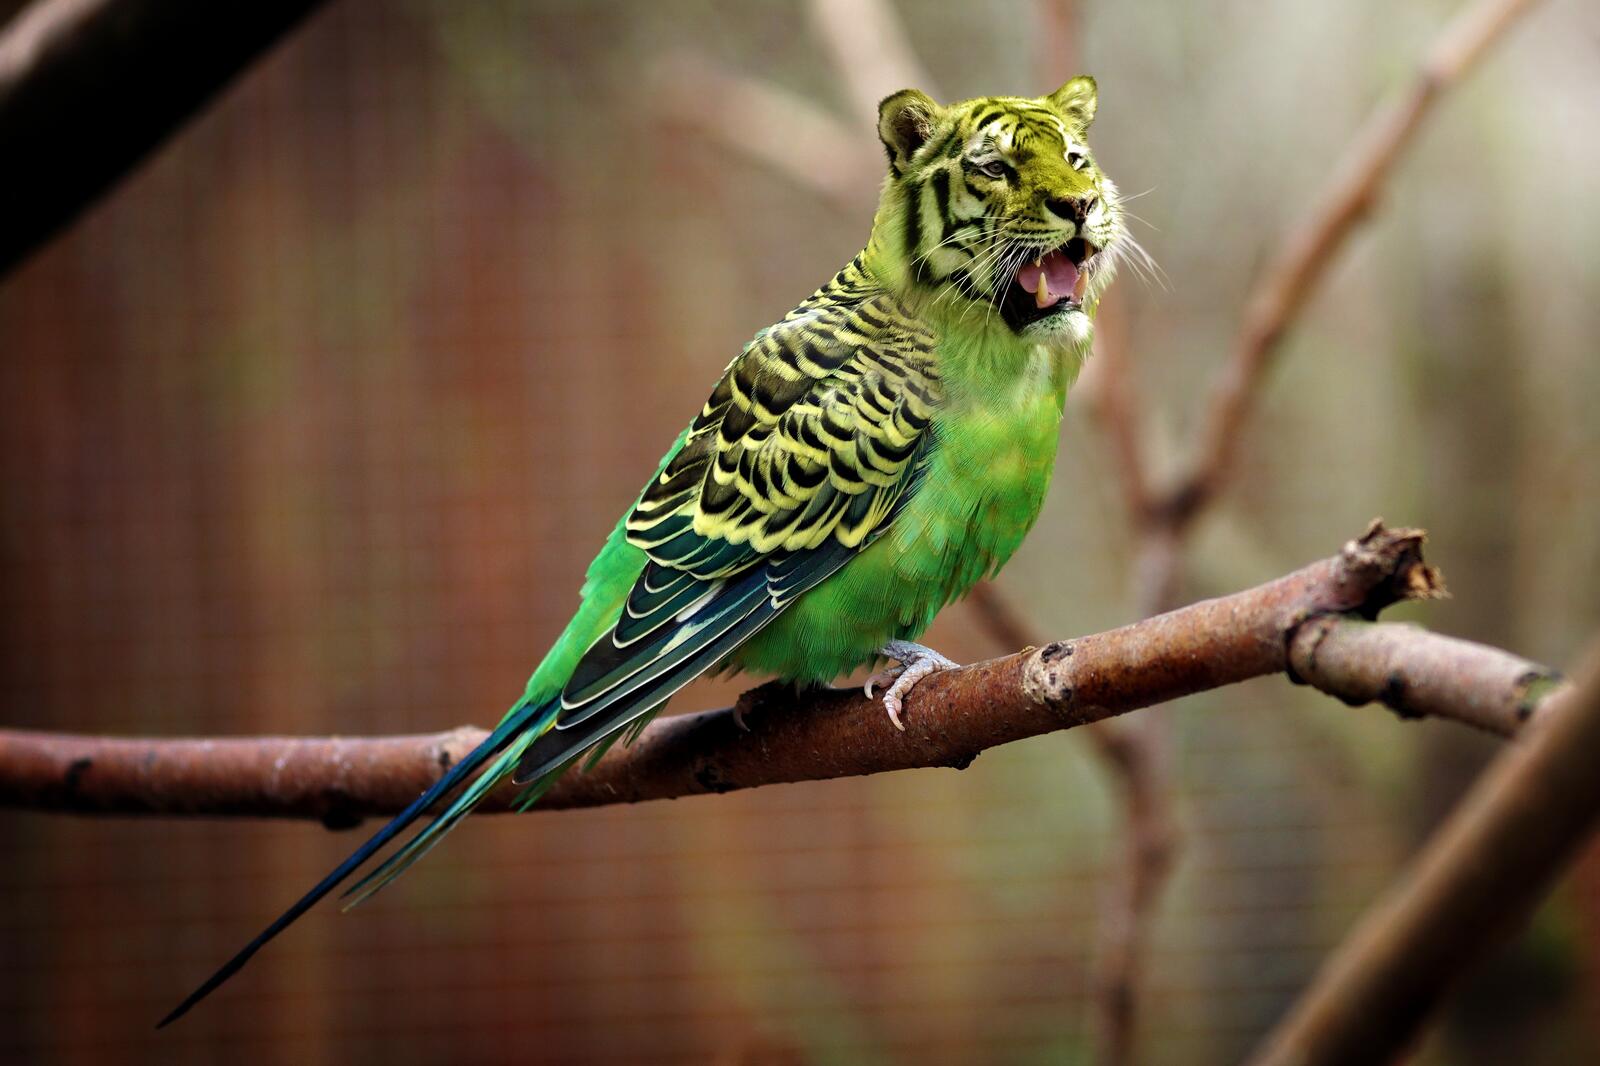 Wallpapers tiger wavy parrot photoshop on the desktop